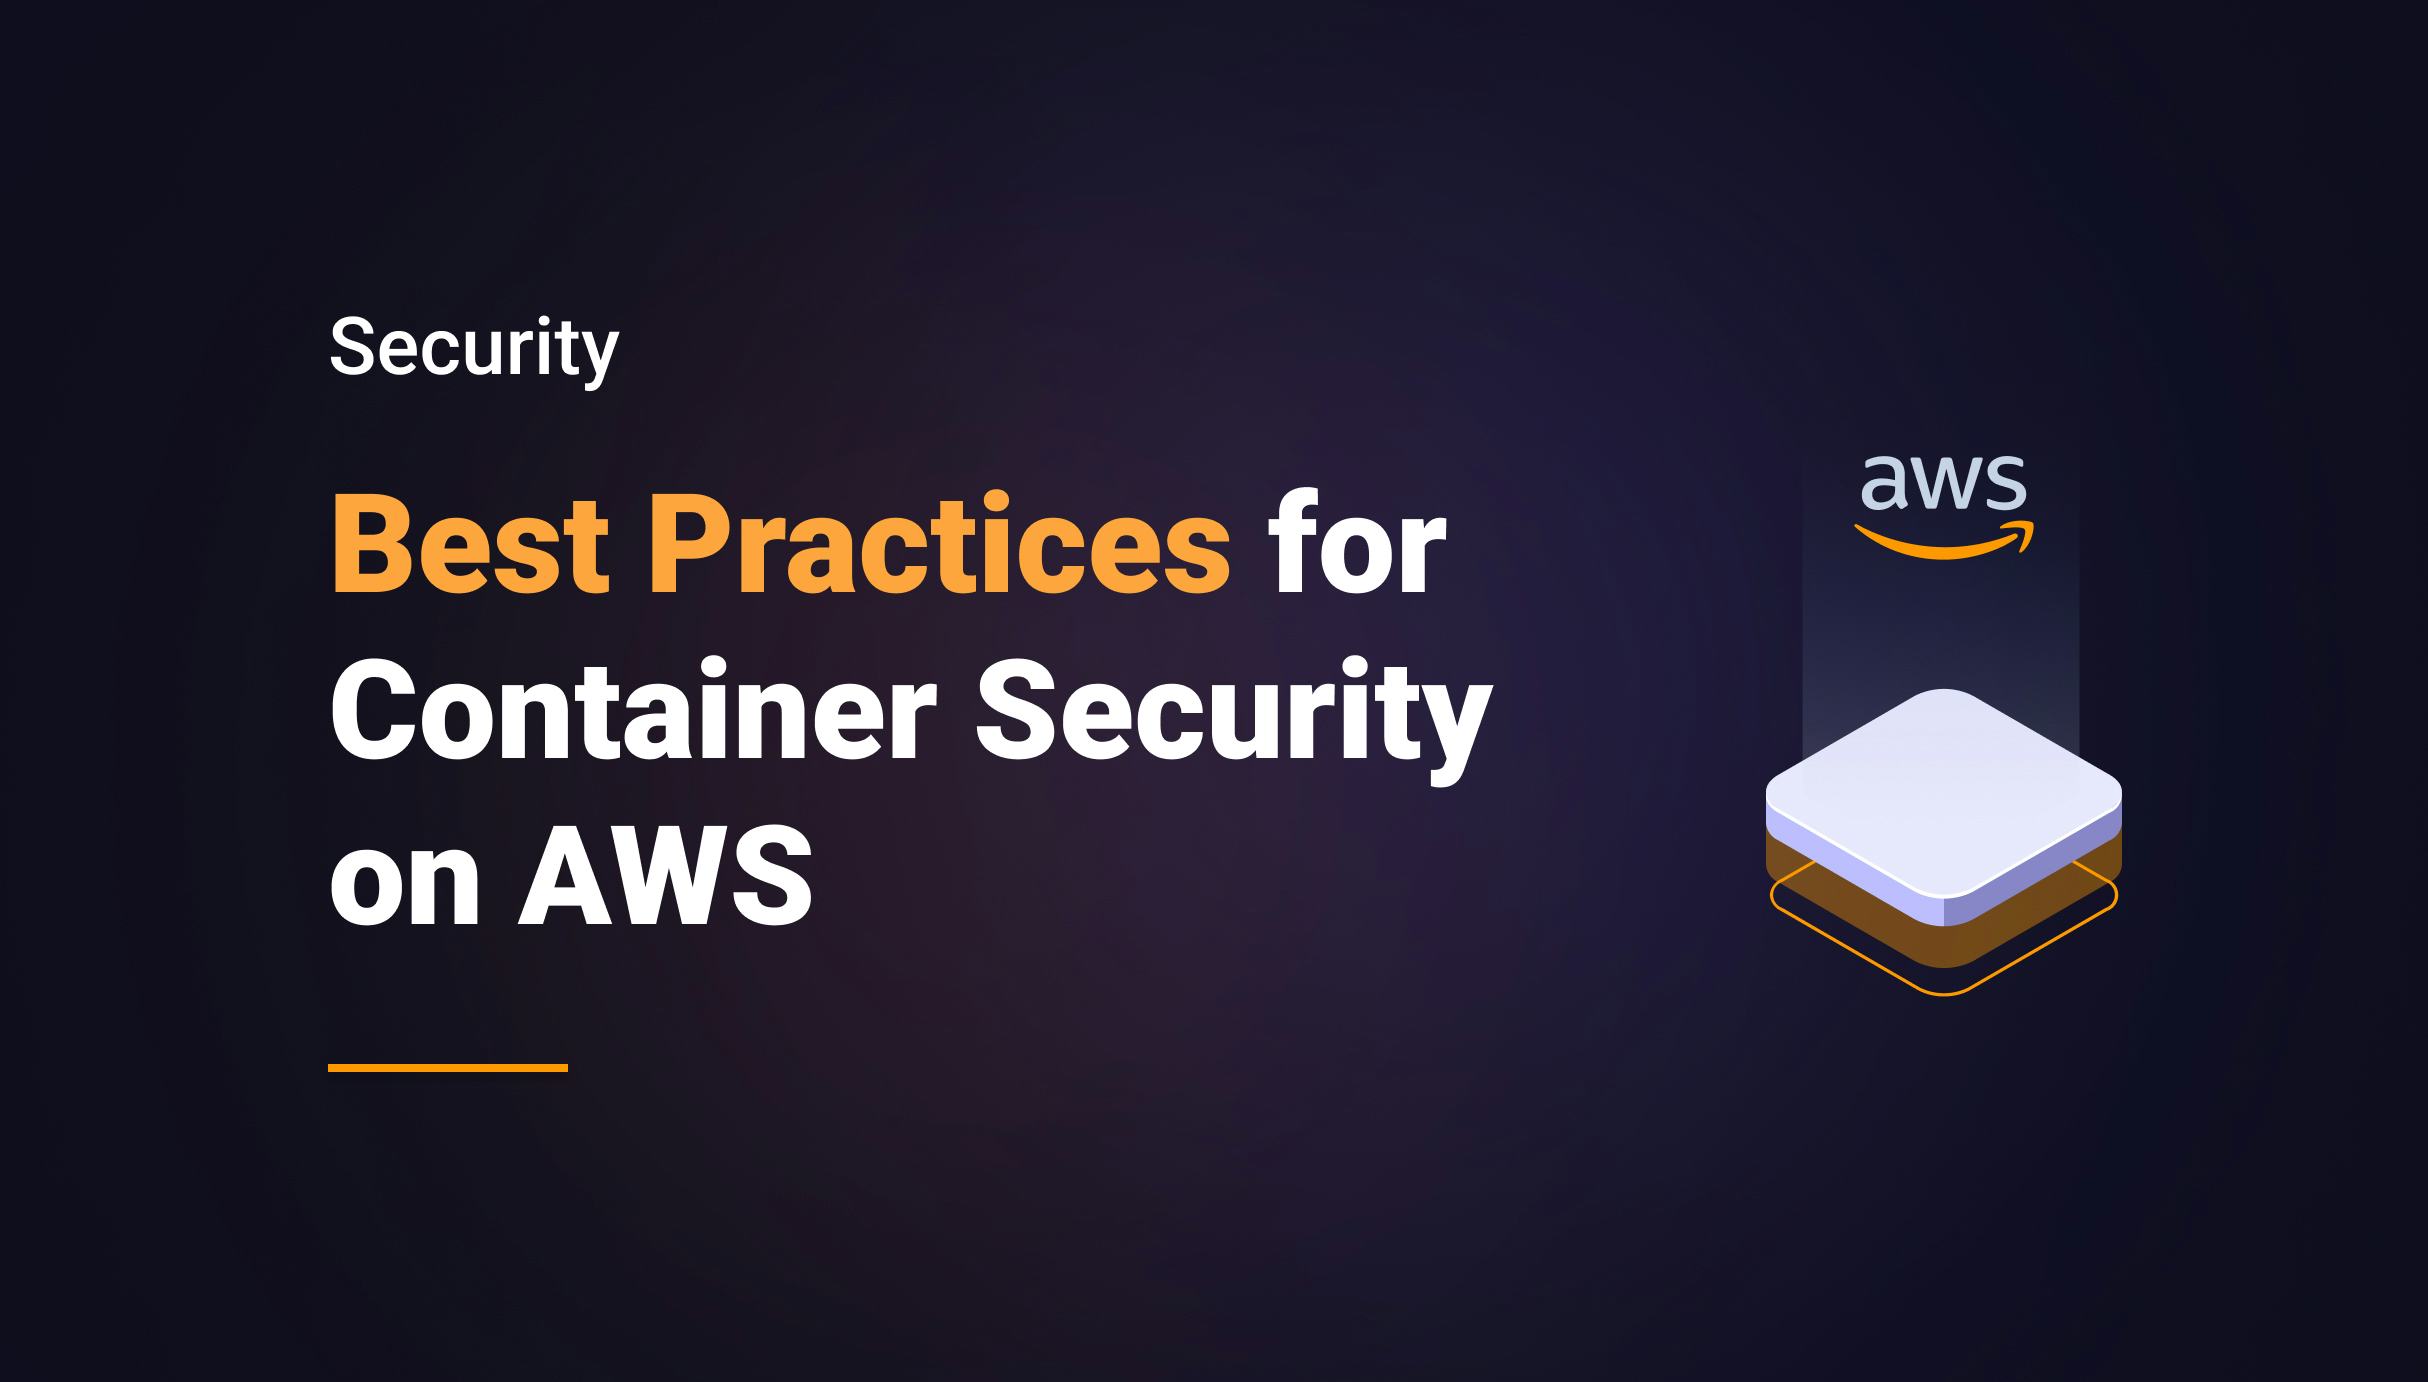 Best Practices for Container Security on AWS